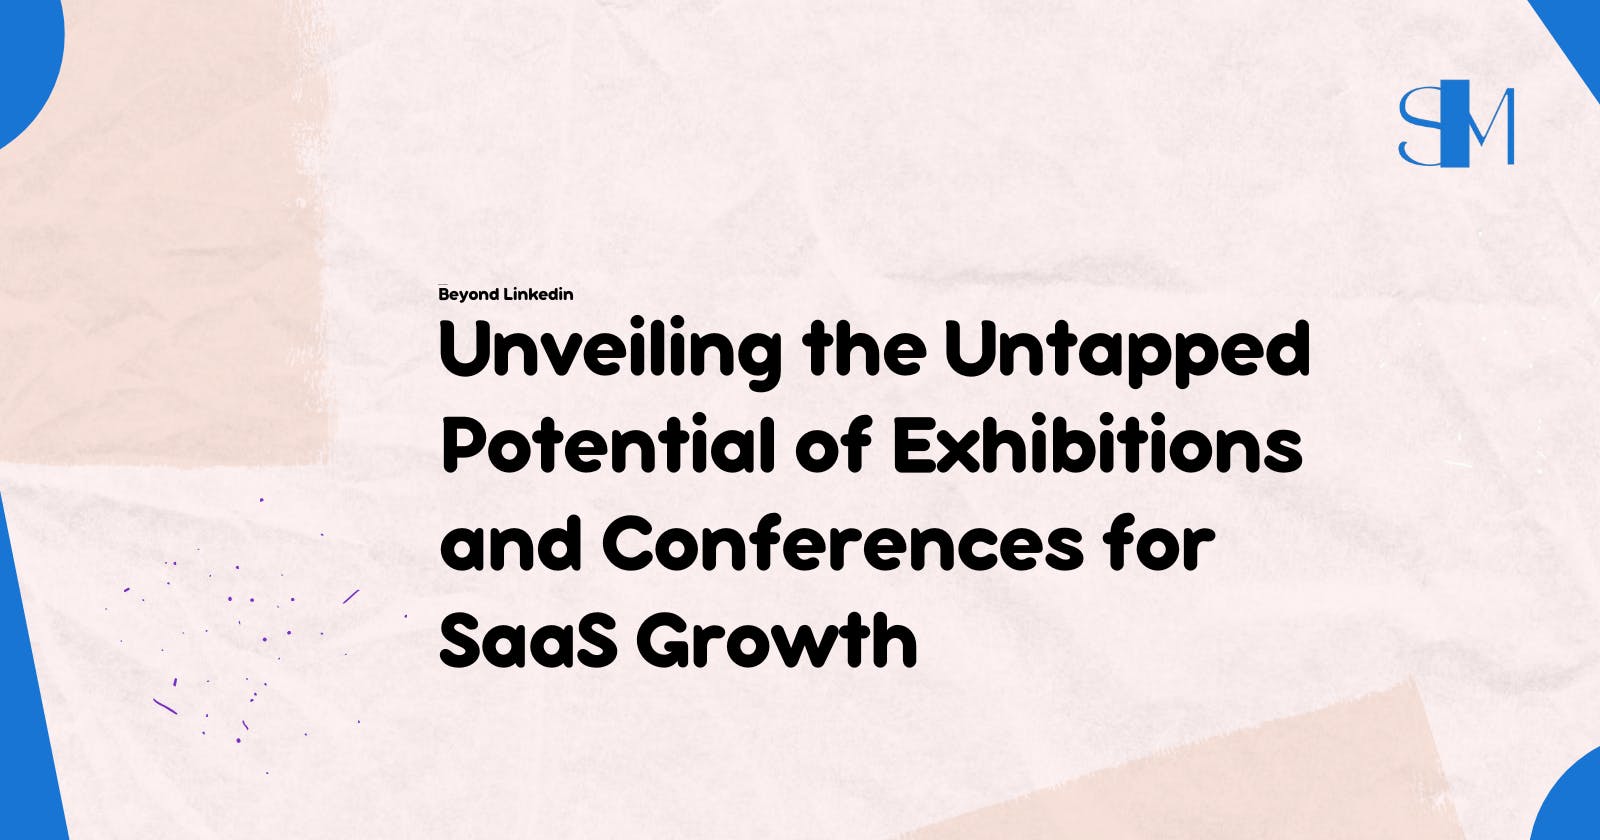 Beyond LinkedIn: Unveiling the Untapped Potential of Exhibitions and Conferences for SaaS Growth